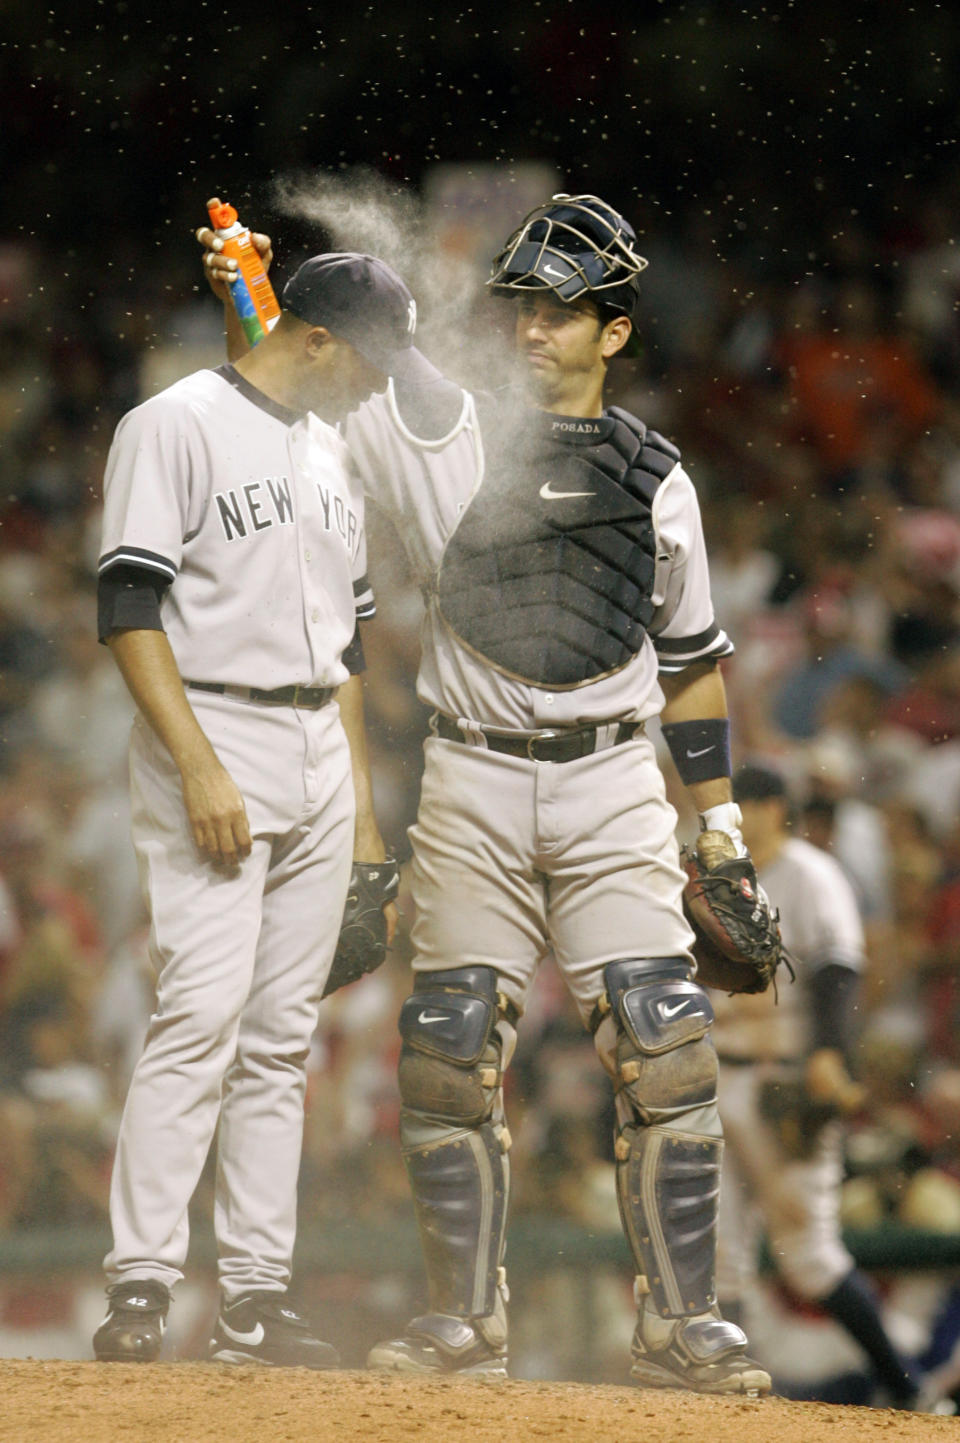 FILE - New York Yankees catcher Jorge Posada, right, applies bug spray to relief pitcher Mariano Rivera before the bottom of the ninth inning in Game 2 of an American League Division Series baseball game against the Cleveland Indians, in Cleveland, Oct. 5, 2007. Their fans still bugged by what happened in 2007, the New York Yankees could face those pesky midges again when the American League Division Series returns to Cleveland this weekend. (AP Photo/Amy Sancetta, file)